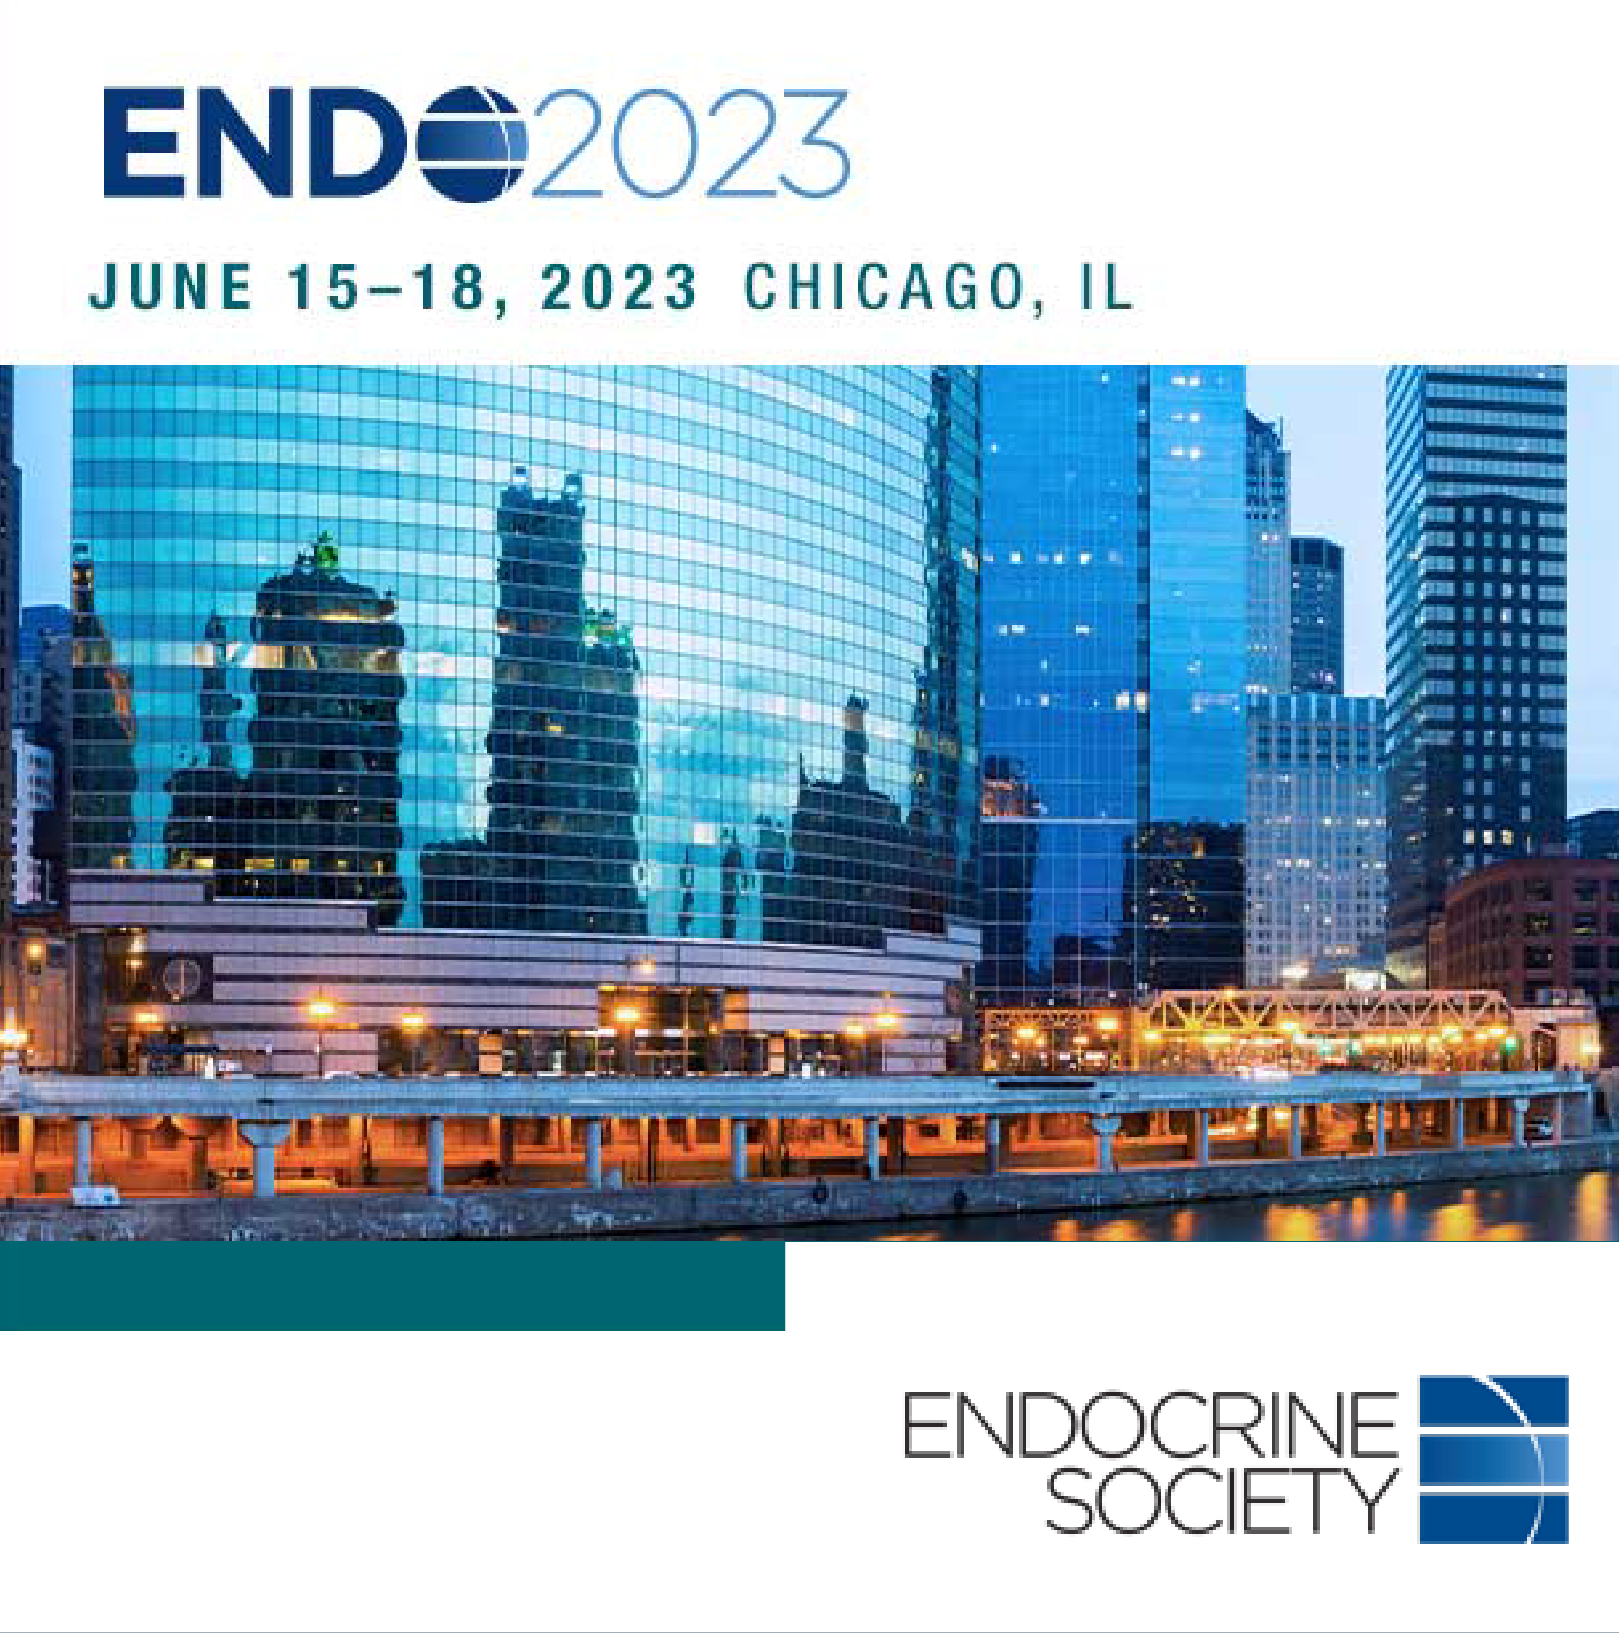 Annual Meeting of the Endocrine Society - ENDO 2023